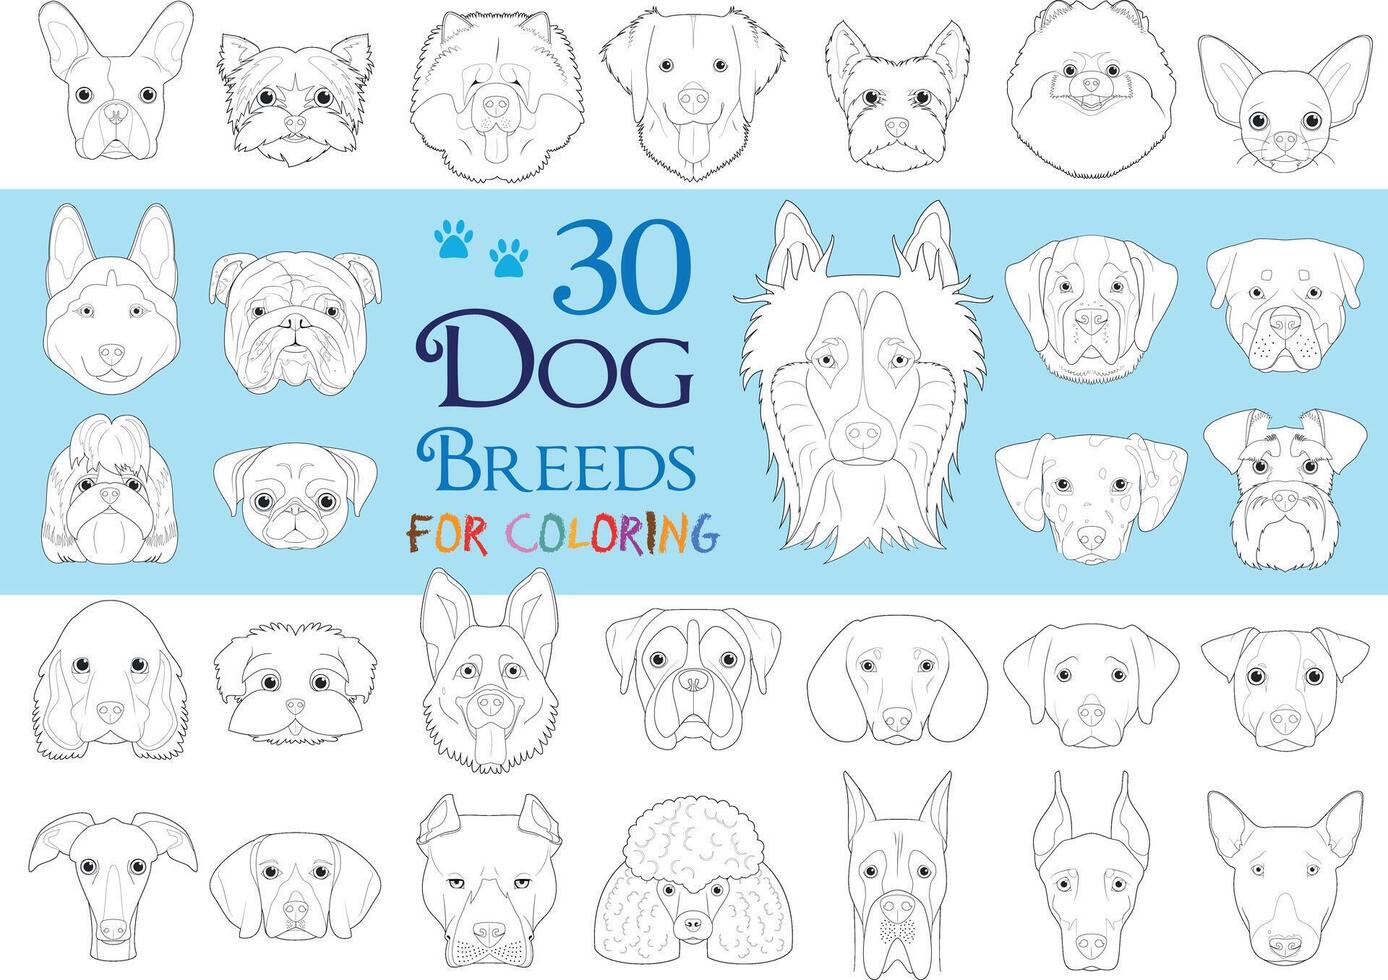 Dog Breeds Collection Volume 1. Set of 30 different dog breeds for coloring in cartoon style. vector